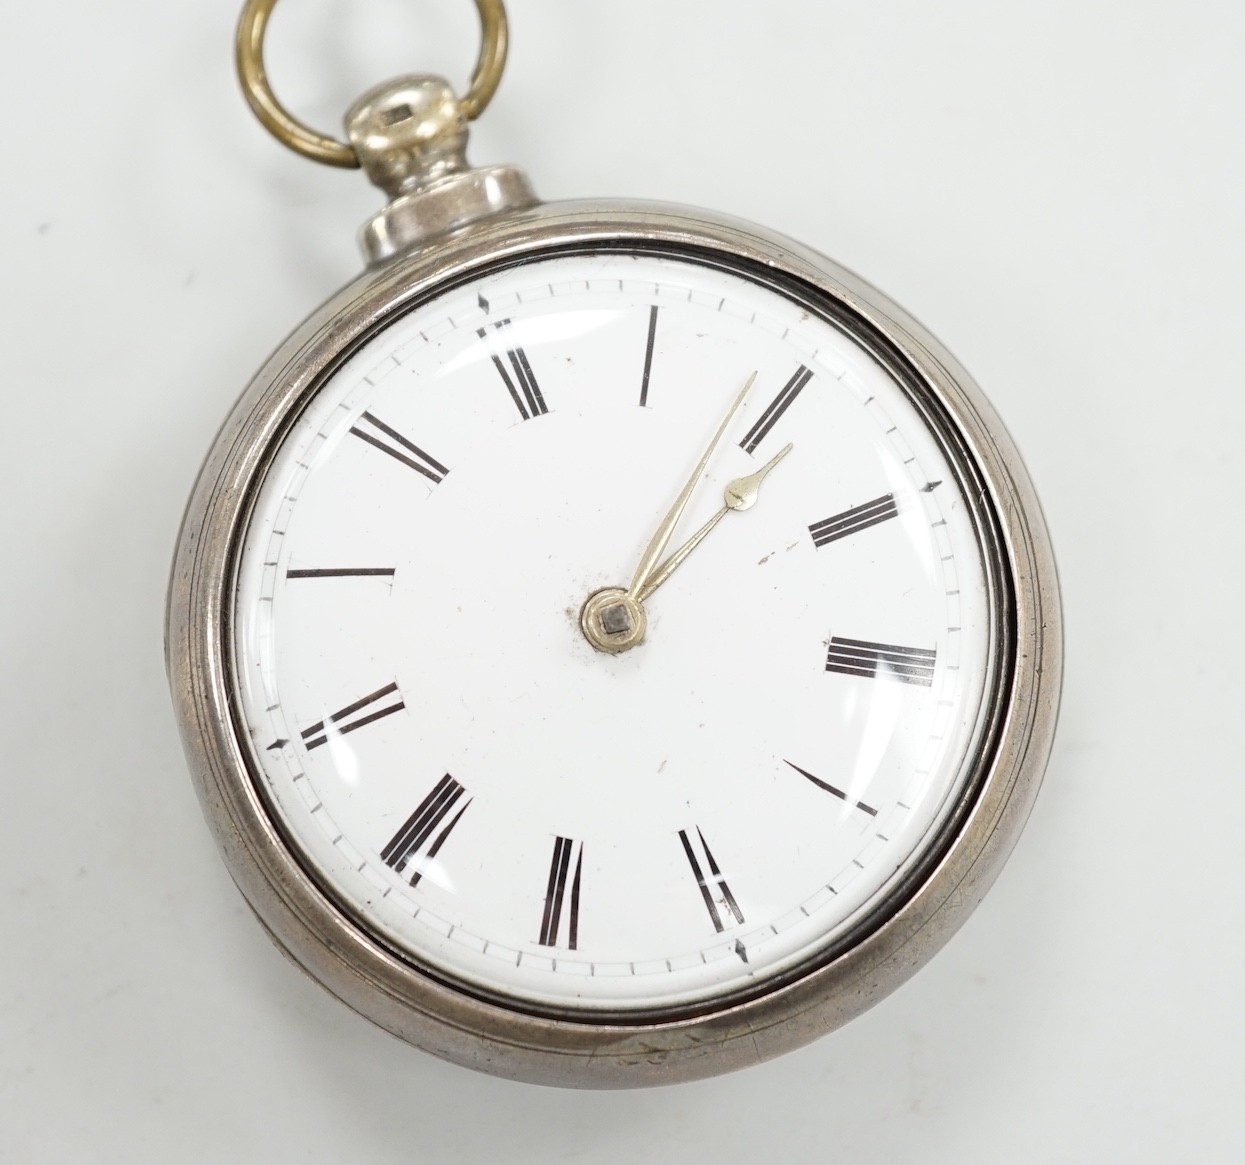 A 19th century silver pair cased keywind verge pocket watch, by Edward Tompian, London, with Roman